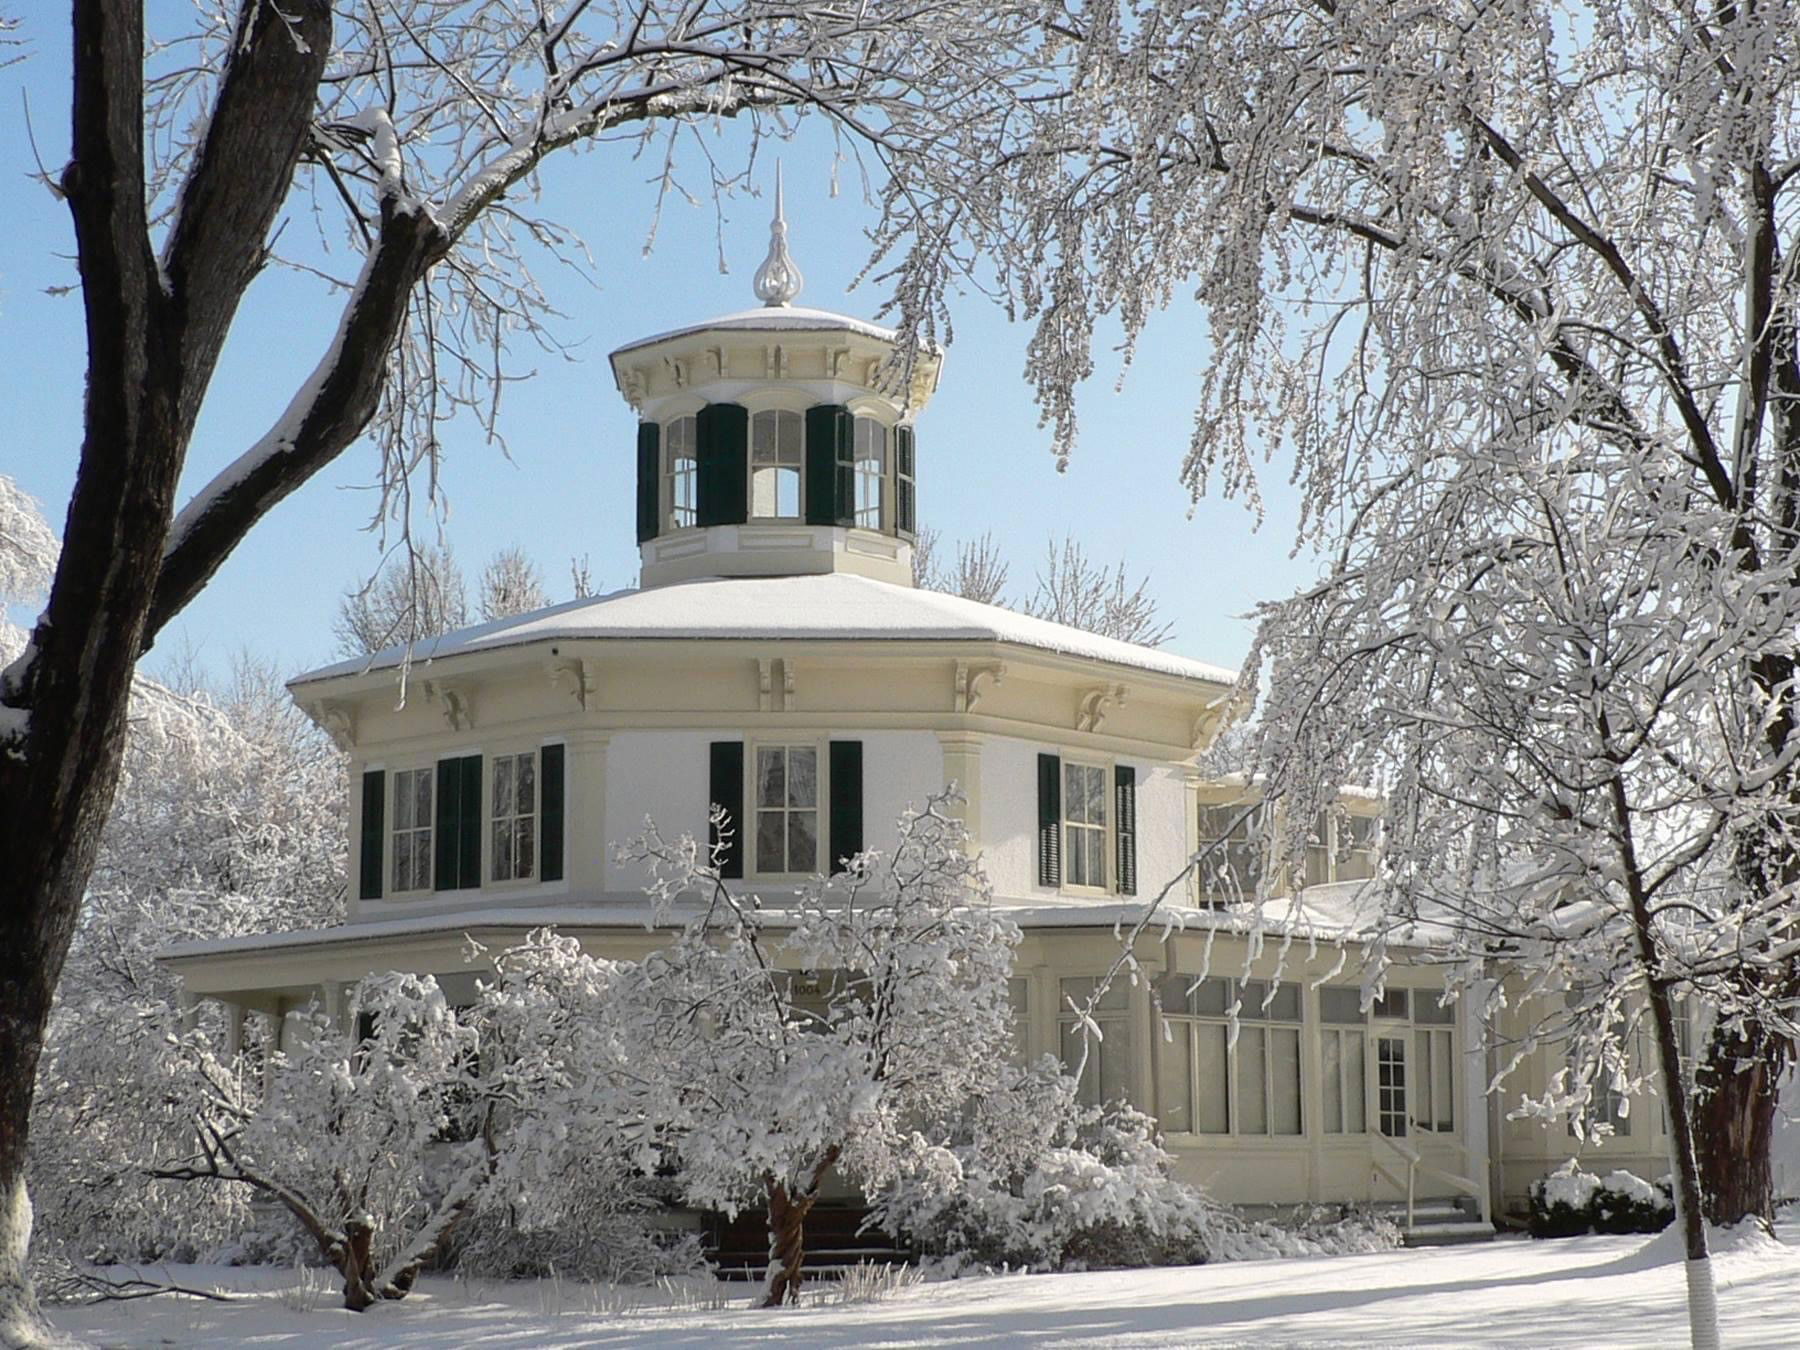 Octagon House at Christmas